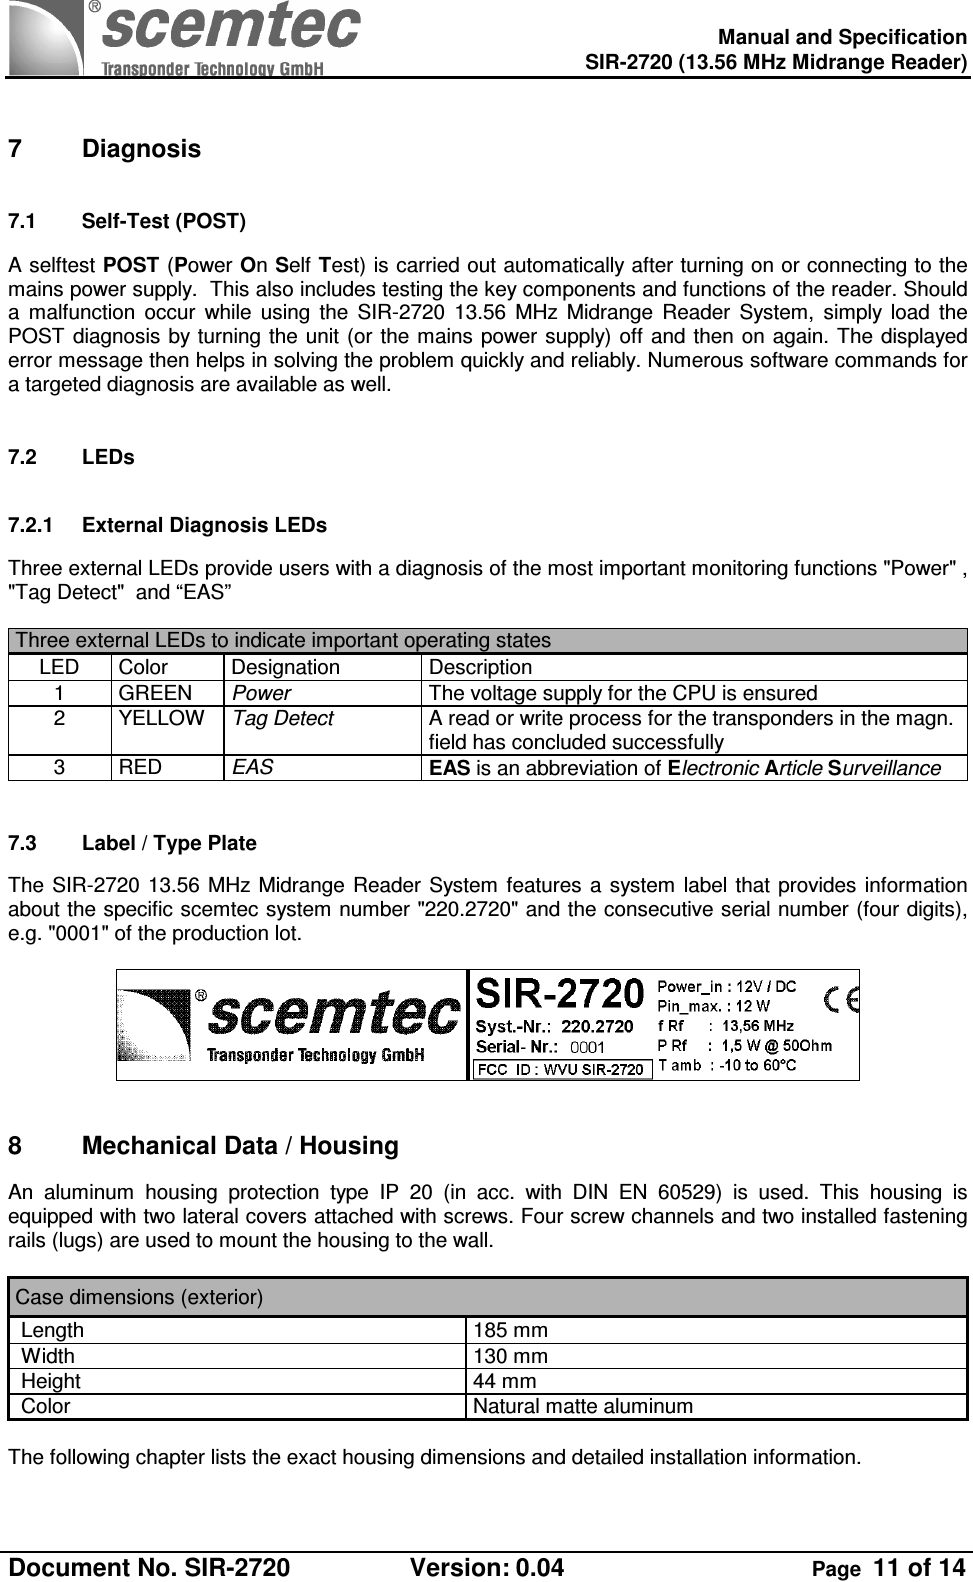    Manual and Specification  SIR-2720 (13.56 MHz Midrange Reader)  Document No. SIR-2720  Version: 0.04  Page  11 of 14   7  Diagnosis 7.1  Self-Test (POST) A selftest POST (Power On Self Test) is carried out automatically after turning on or connecting to the mains power supply.  This also includes testing the key components and functions of the reader. Should a  malfunction  occur  while  using  the  SIR-2720  13.56  MHz  Midrange  Reader  System,  simply  load  the POST  diagnosis by turning the unit (or  the mains  power supply) off and then on again.  The  displayed error message then helps in solving the problem quickly and reliably. Numerous software commands for a targeted diagnosis are available as well.  7.2  LEDs 7.2.1  External Diagnosis LEDs Three external LEDs provide users with a diagnosis of the most important monitoring functions &quot;Power&quot; , &quot;Tag Detect&quot;  and “EAS”  Three external LEDs to indicate important operating states  LED  Color  Designation  Description 1  GREEN  Power   The voltage supply for the CPU is ensured 2  YELLOW  Tag Detect  A read or write process for the transponders in the magn. field has concluded successfully 3  RED  EAS  EAS is an abbreviation of Electronic Article Surveillance  7.3  Label / Type Plate   The  SIR-2720 13.56 MHz  Midrange  Reader System  features  a  system  label that provides  information about the specific scemtec system number &quot;220.2720&quot; and the consecutive serial number (four digits), e.g. &quot;0001&quot; of the production lot.    8  Mechanical Data / Housing An  aluminum  housing  protection  type  IP  20  (in  acc.  with  DIN  EN  60529)  is  used.  This  housing  is equipped with two lateral covers attached with screws. Four screw channels and two installed fastening rails (lugs) are used to mount the housing to the wall.   Case dimensions (exterior)  Length  185 mm  Width  130 mm  Height  44 mm  Color   Natural matte aluminum   The following chapter lists the exact housing dimensions and detailed installation information.  